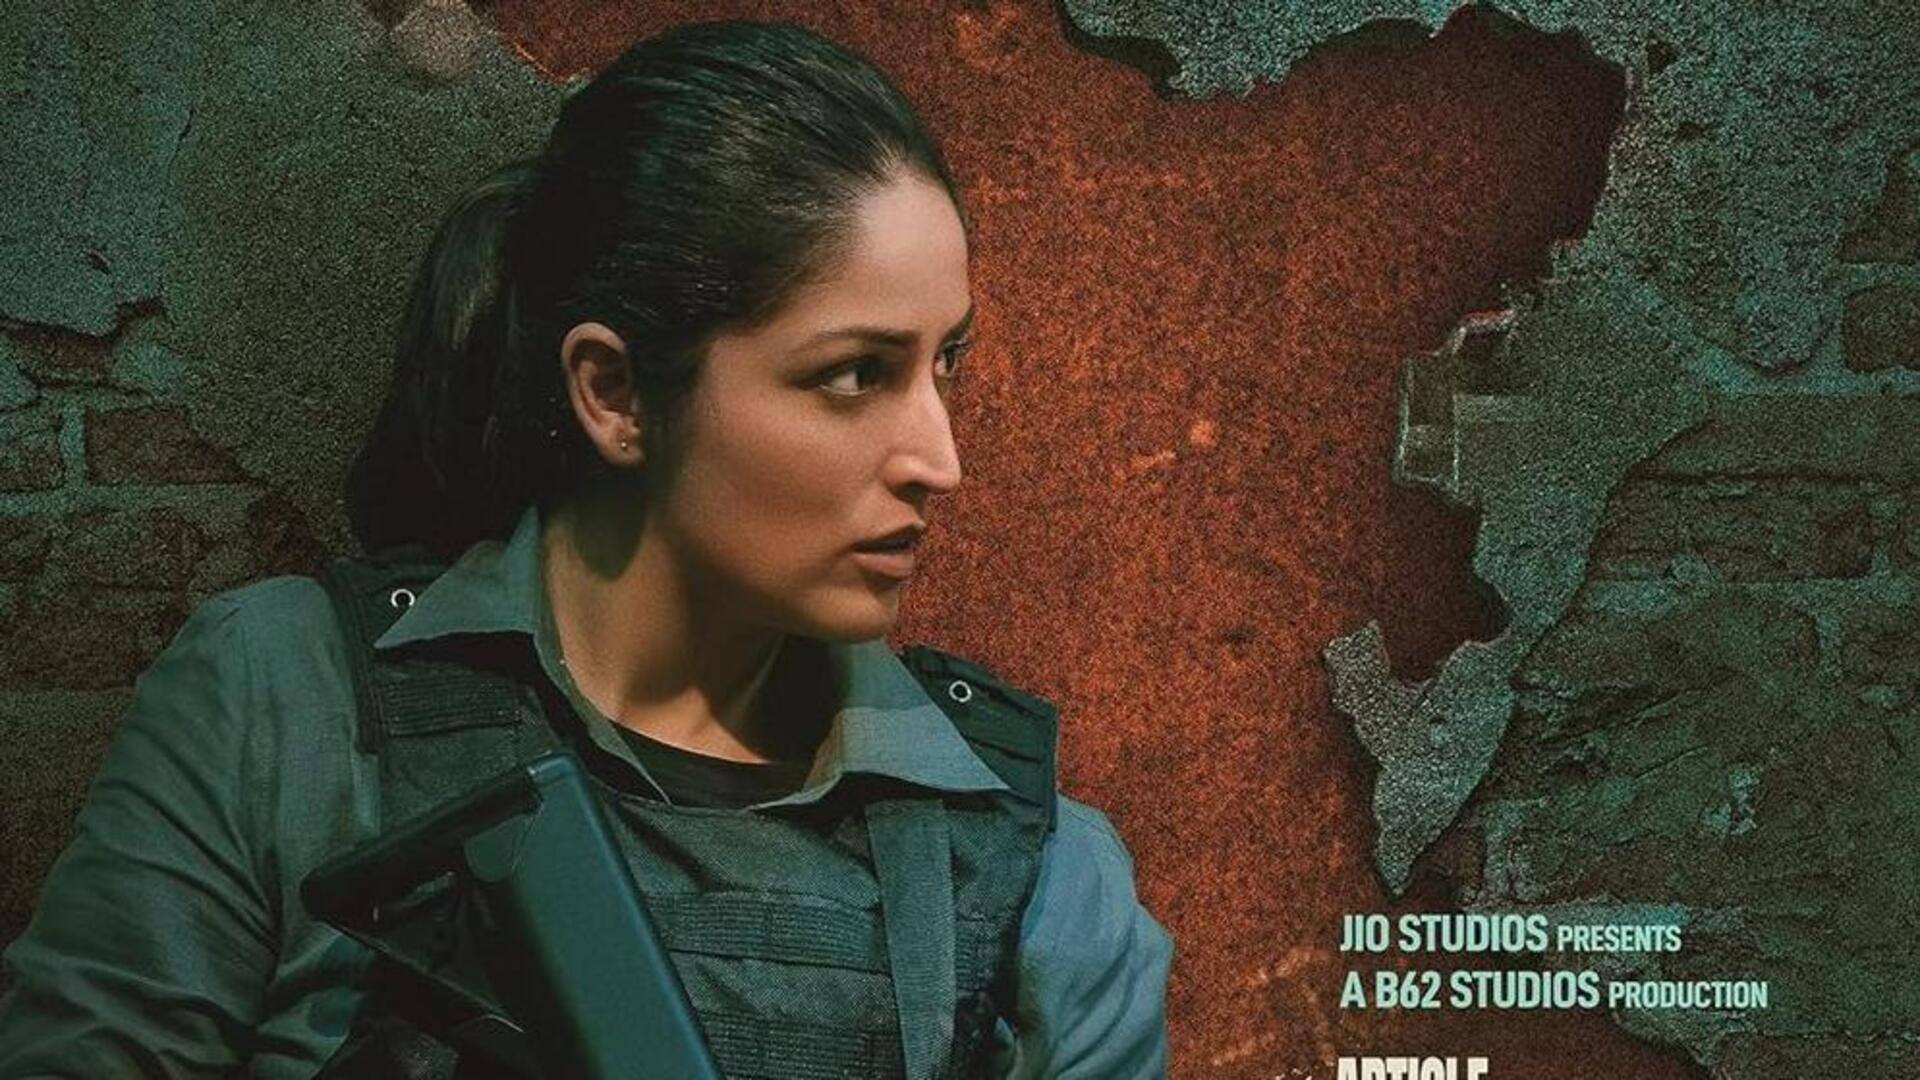 'Article 370': Yami Gautam Dhar starrer banned in Gulf countries